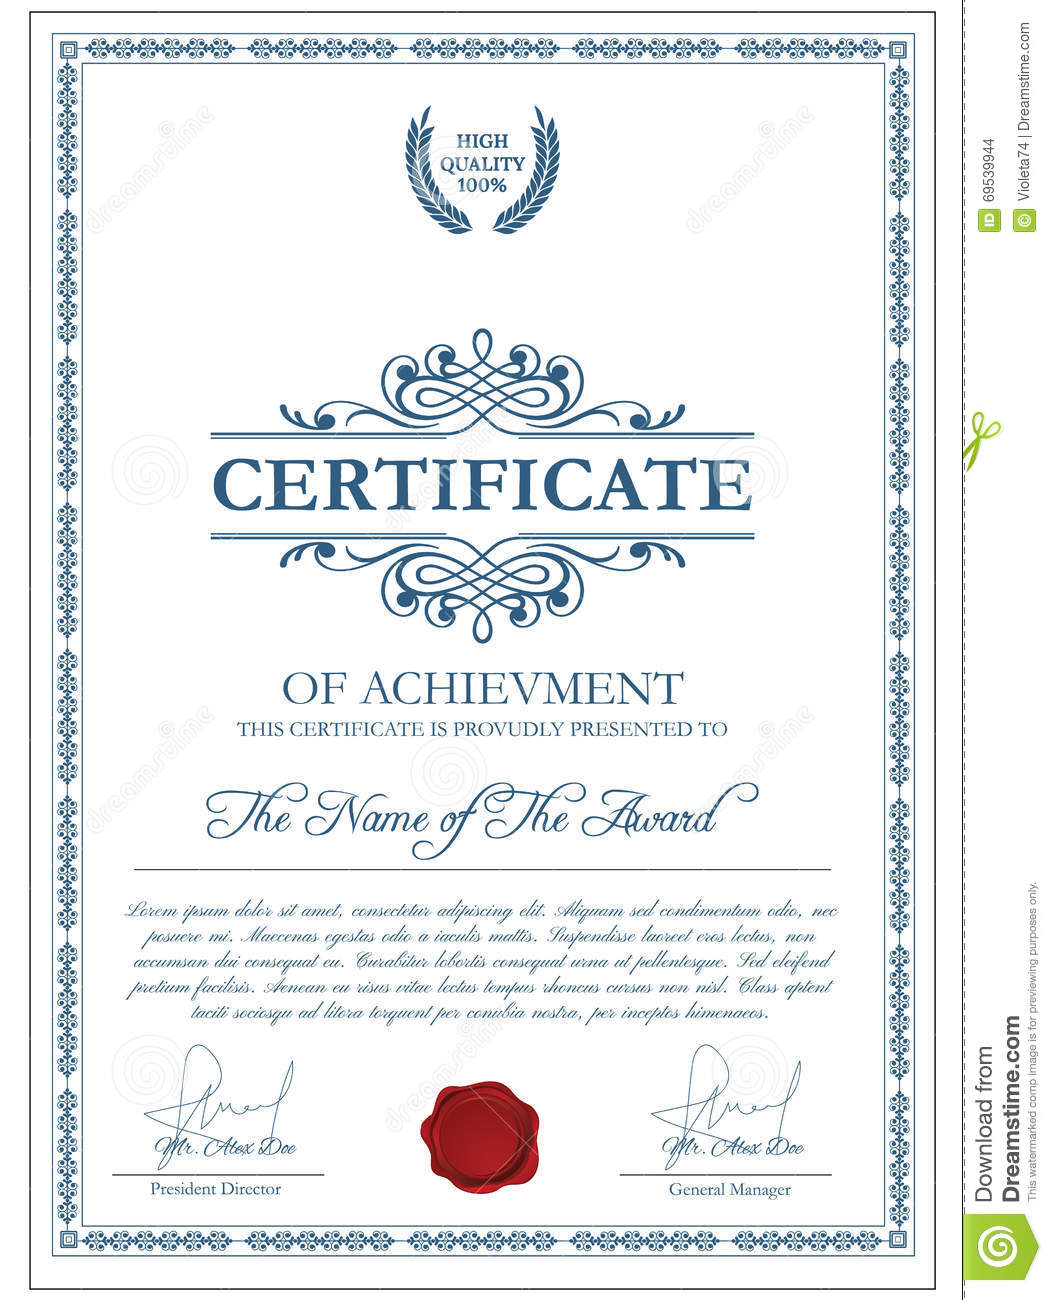 Certificate Template With Guilloche Elements. Stock Vector For Validation Certificate Template